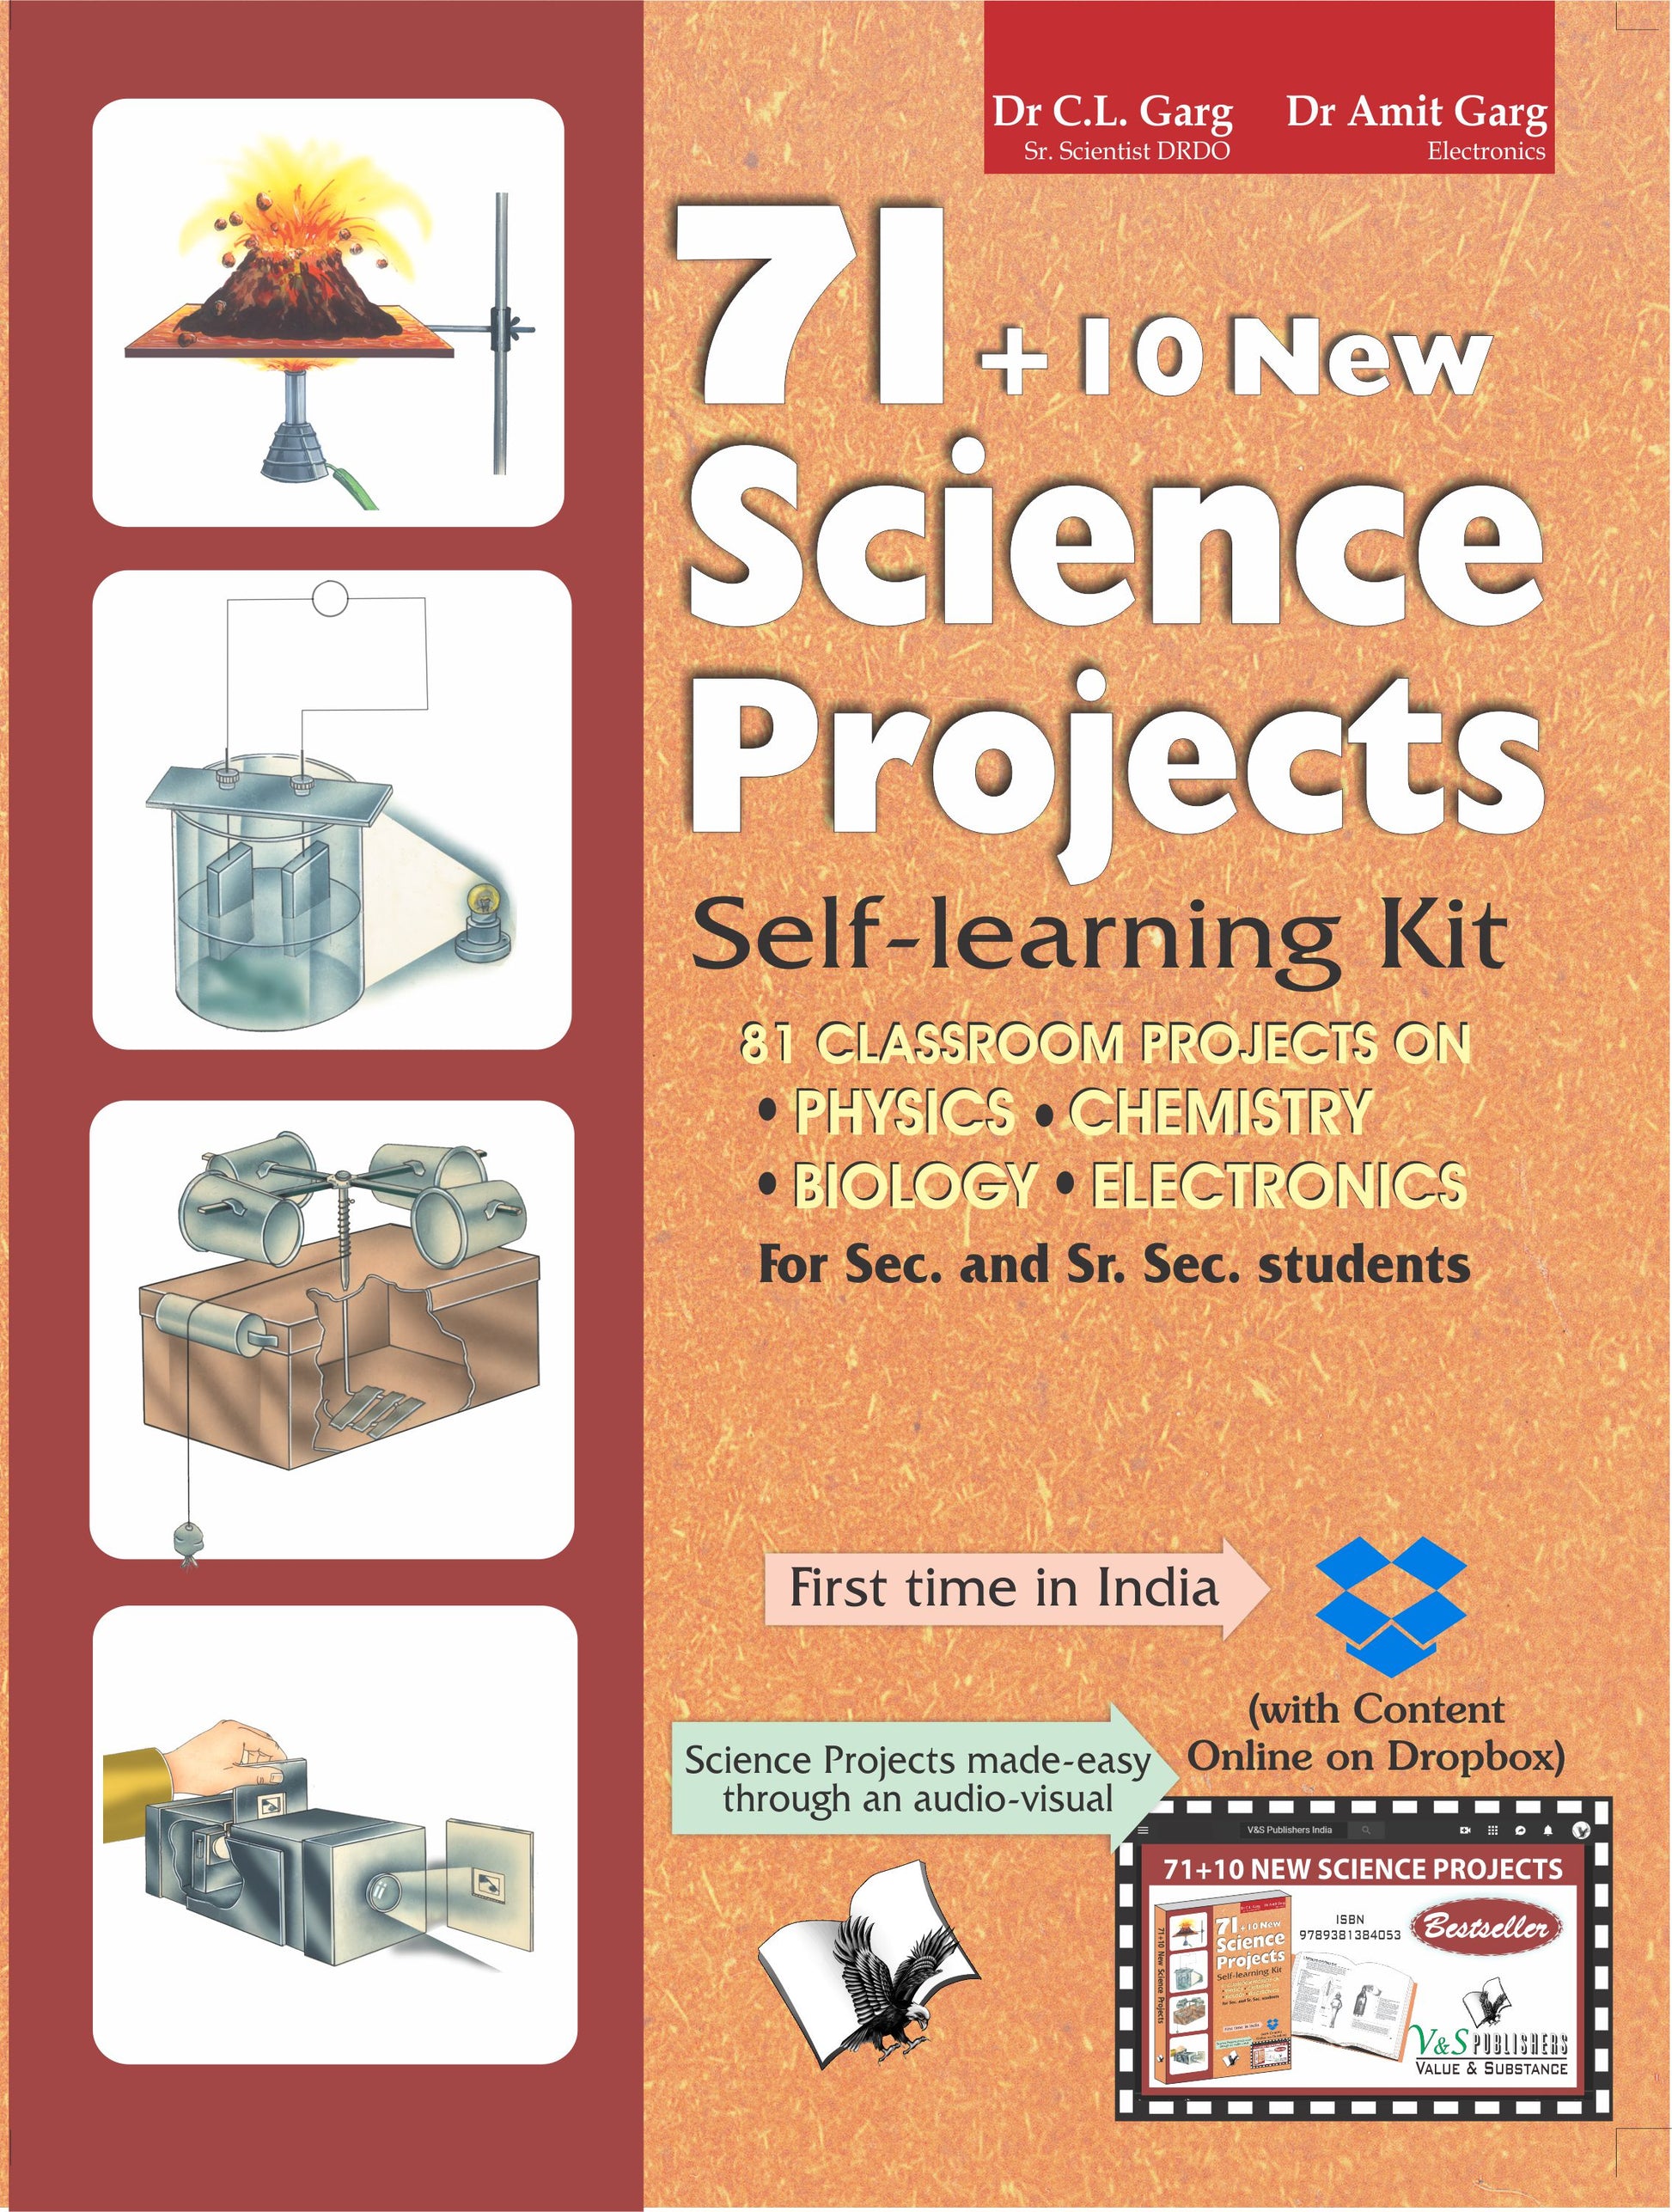 71+10 New Science Projects (With Online Content on Dropbox)